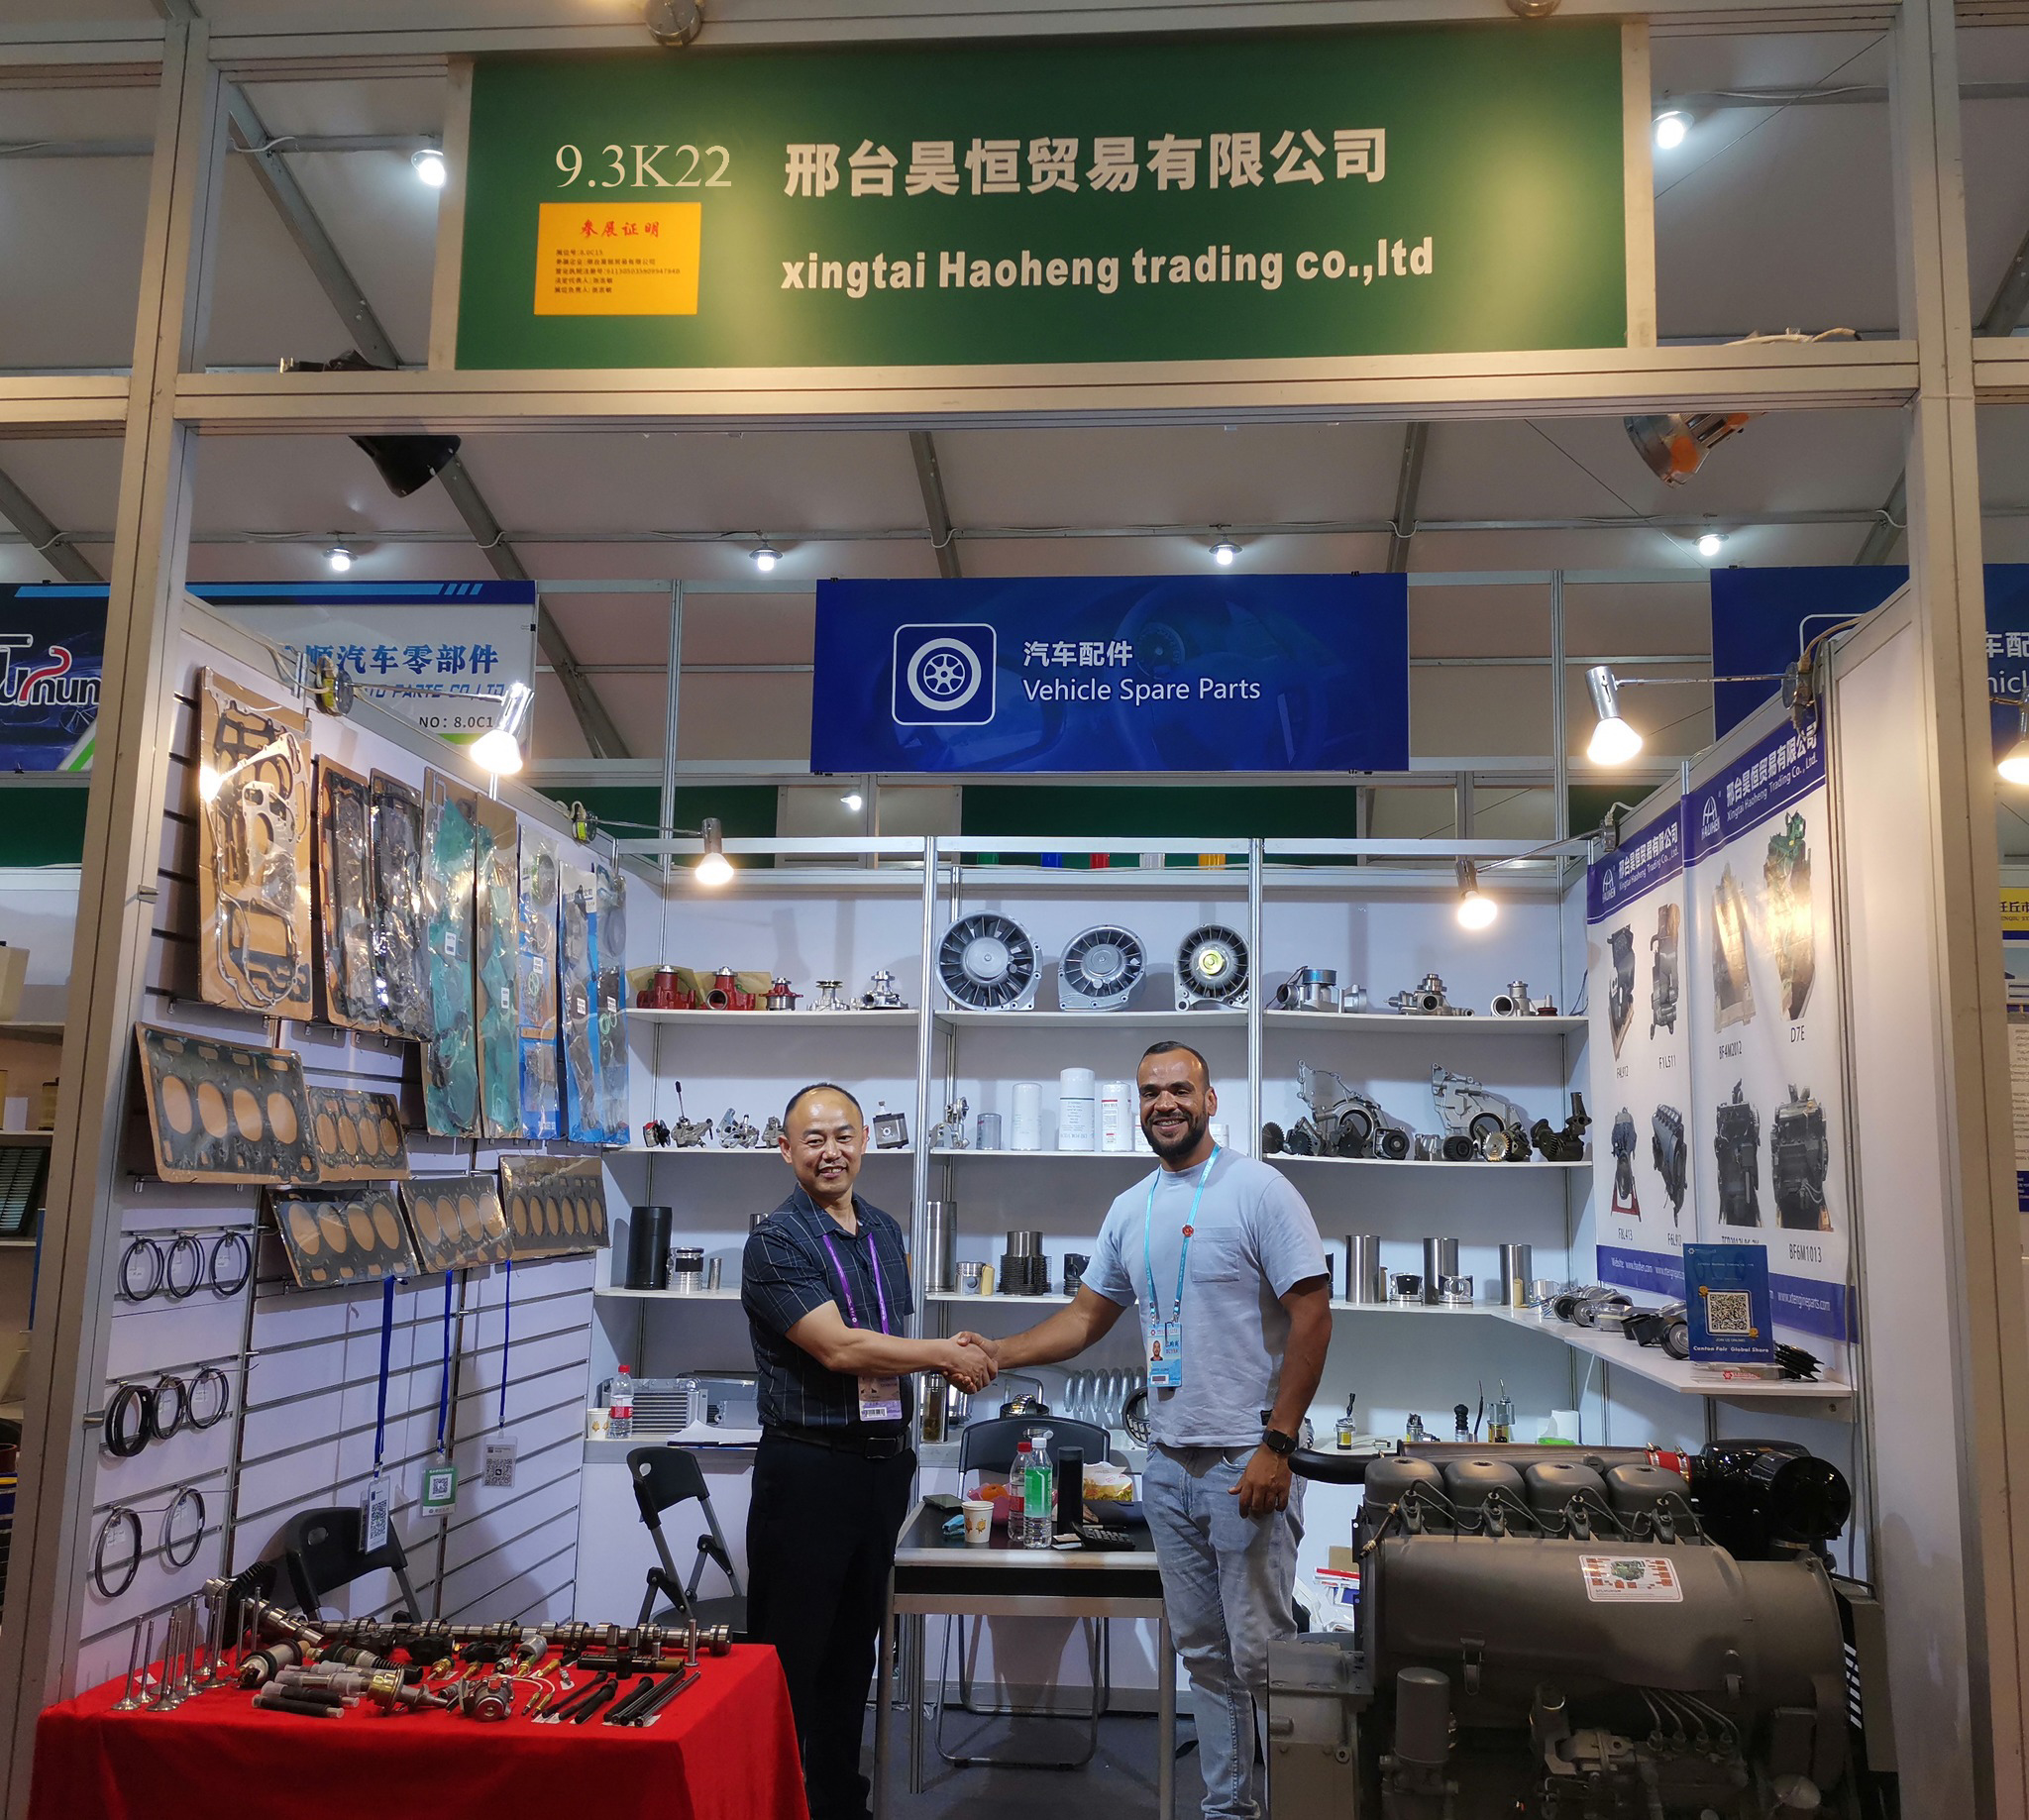 When will Xingtai Haoheng Trading Co., Ltd. hold the 135th Canton Fair?